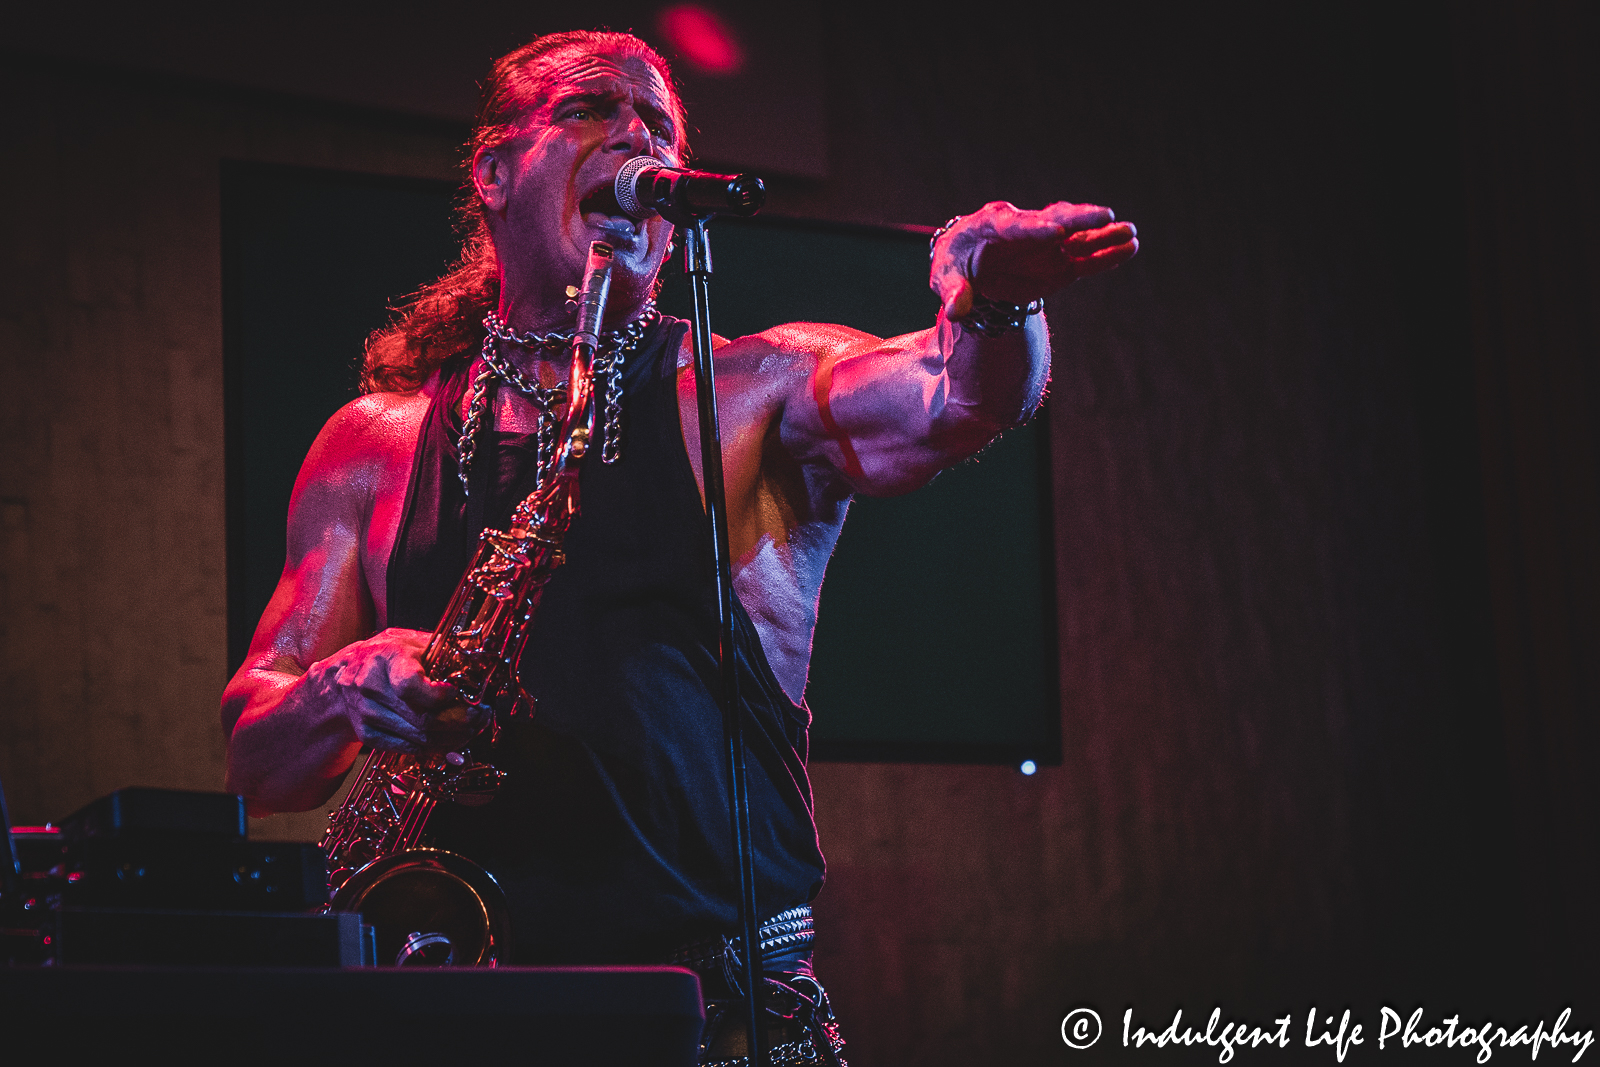 Saxophone player Tim Cappello singing live in concert at the recordBar in downtown Kansas City, MO on June 15, 2023.